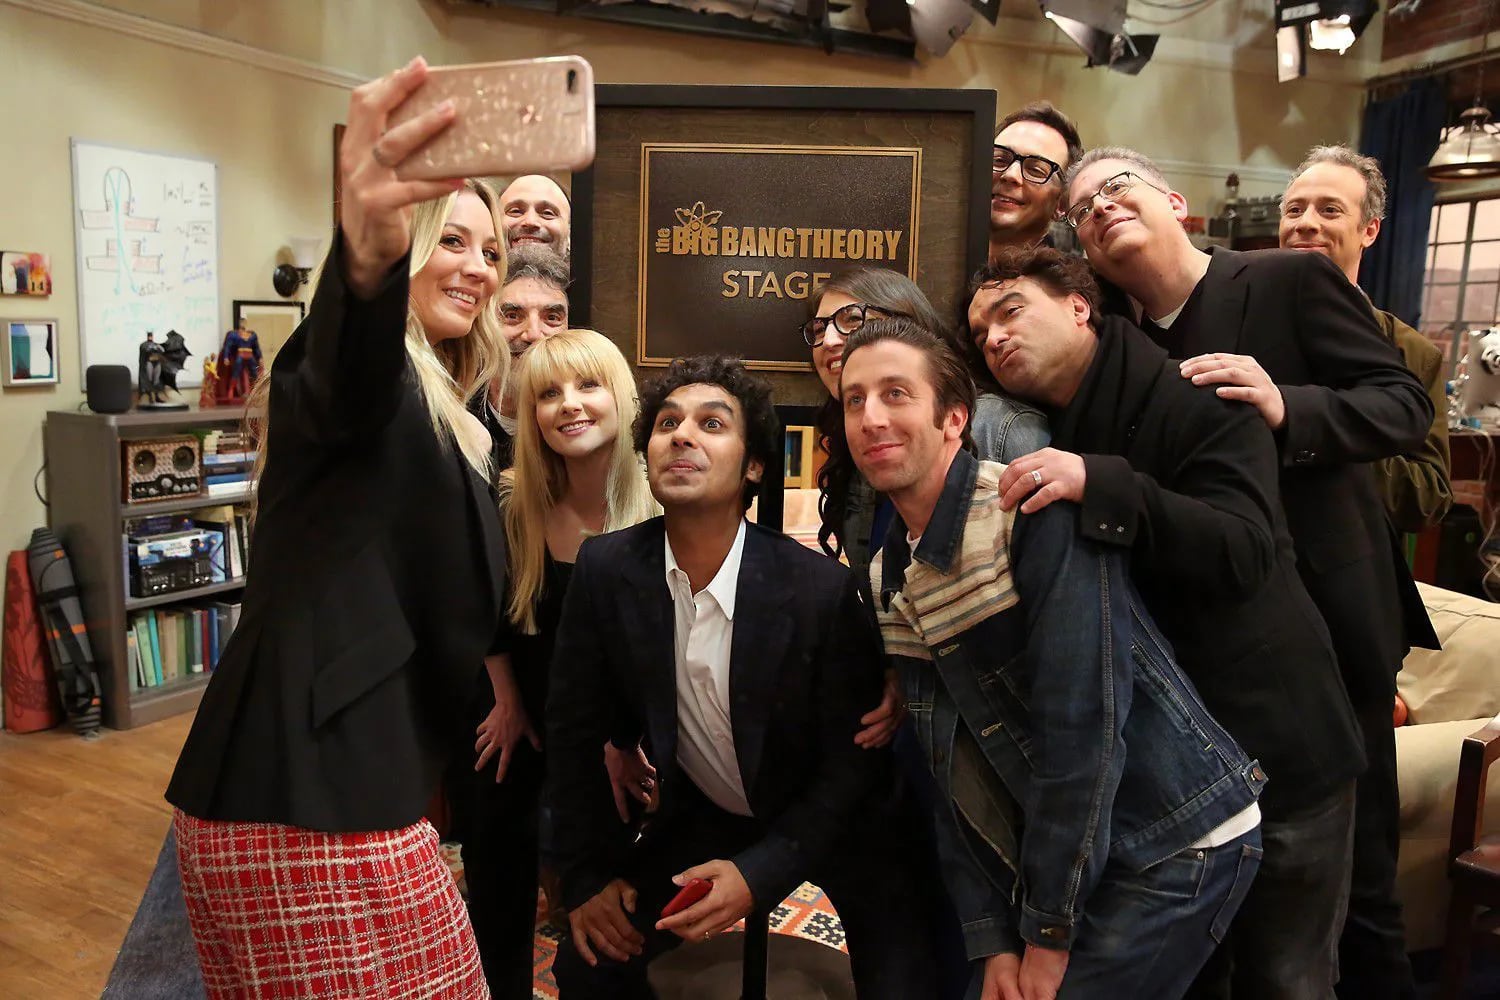 Cast members and producers of CBS's "The Big Bang Theory" took a selfie on the show's Warner Bros. set in February, when the stage that's been home to the record-breaking comedy was renamed in its honor. From left: star Kaley Cuoco, executive producers Steven Molaro and Chuck Lorre; stars Melissa Rauch, Kunal Nayyar, Mayim Bialik, Simon Helberg, Johnny Galecki, and Jim Parsons; executive producer Bill Prady;  star Kevin Sussman.